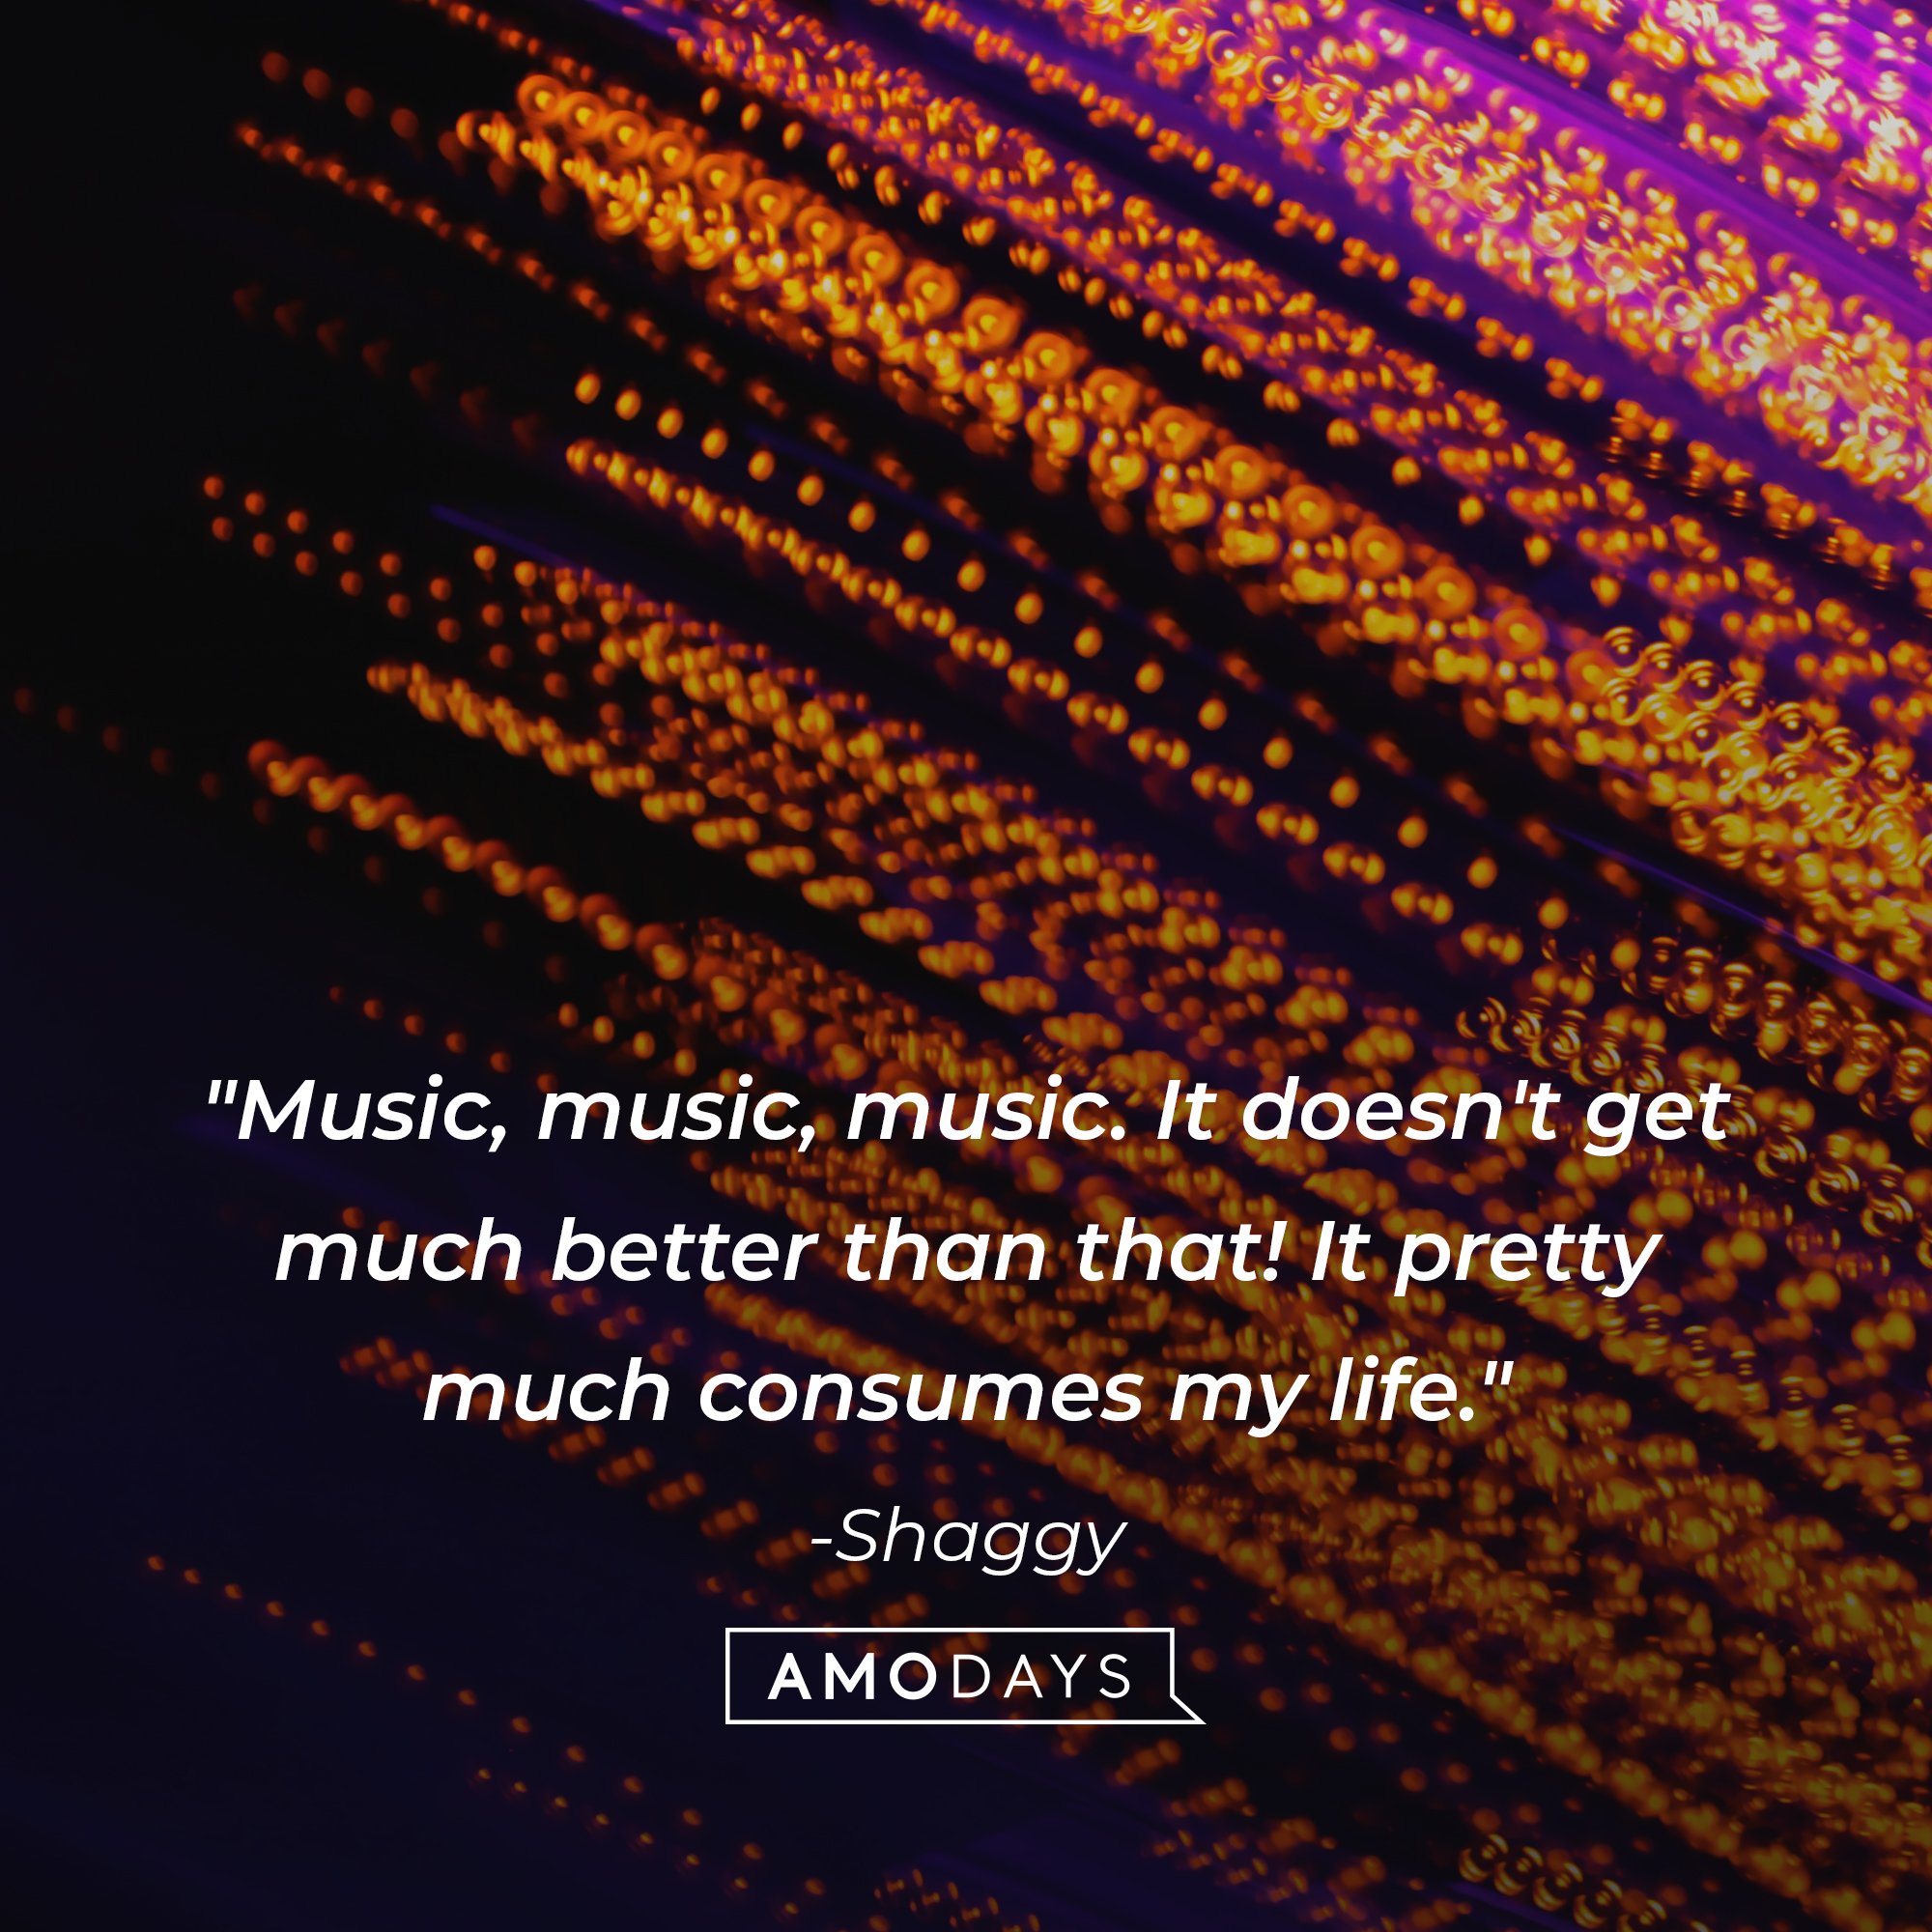 Shaggy's quote: "Music, music, music. It doesn't get much better than that! It pretty much consumes my life." | Image: AmoDays